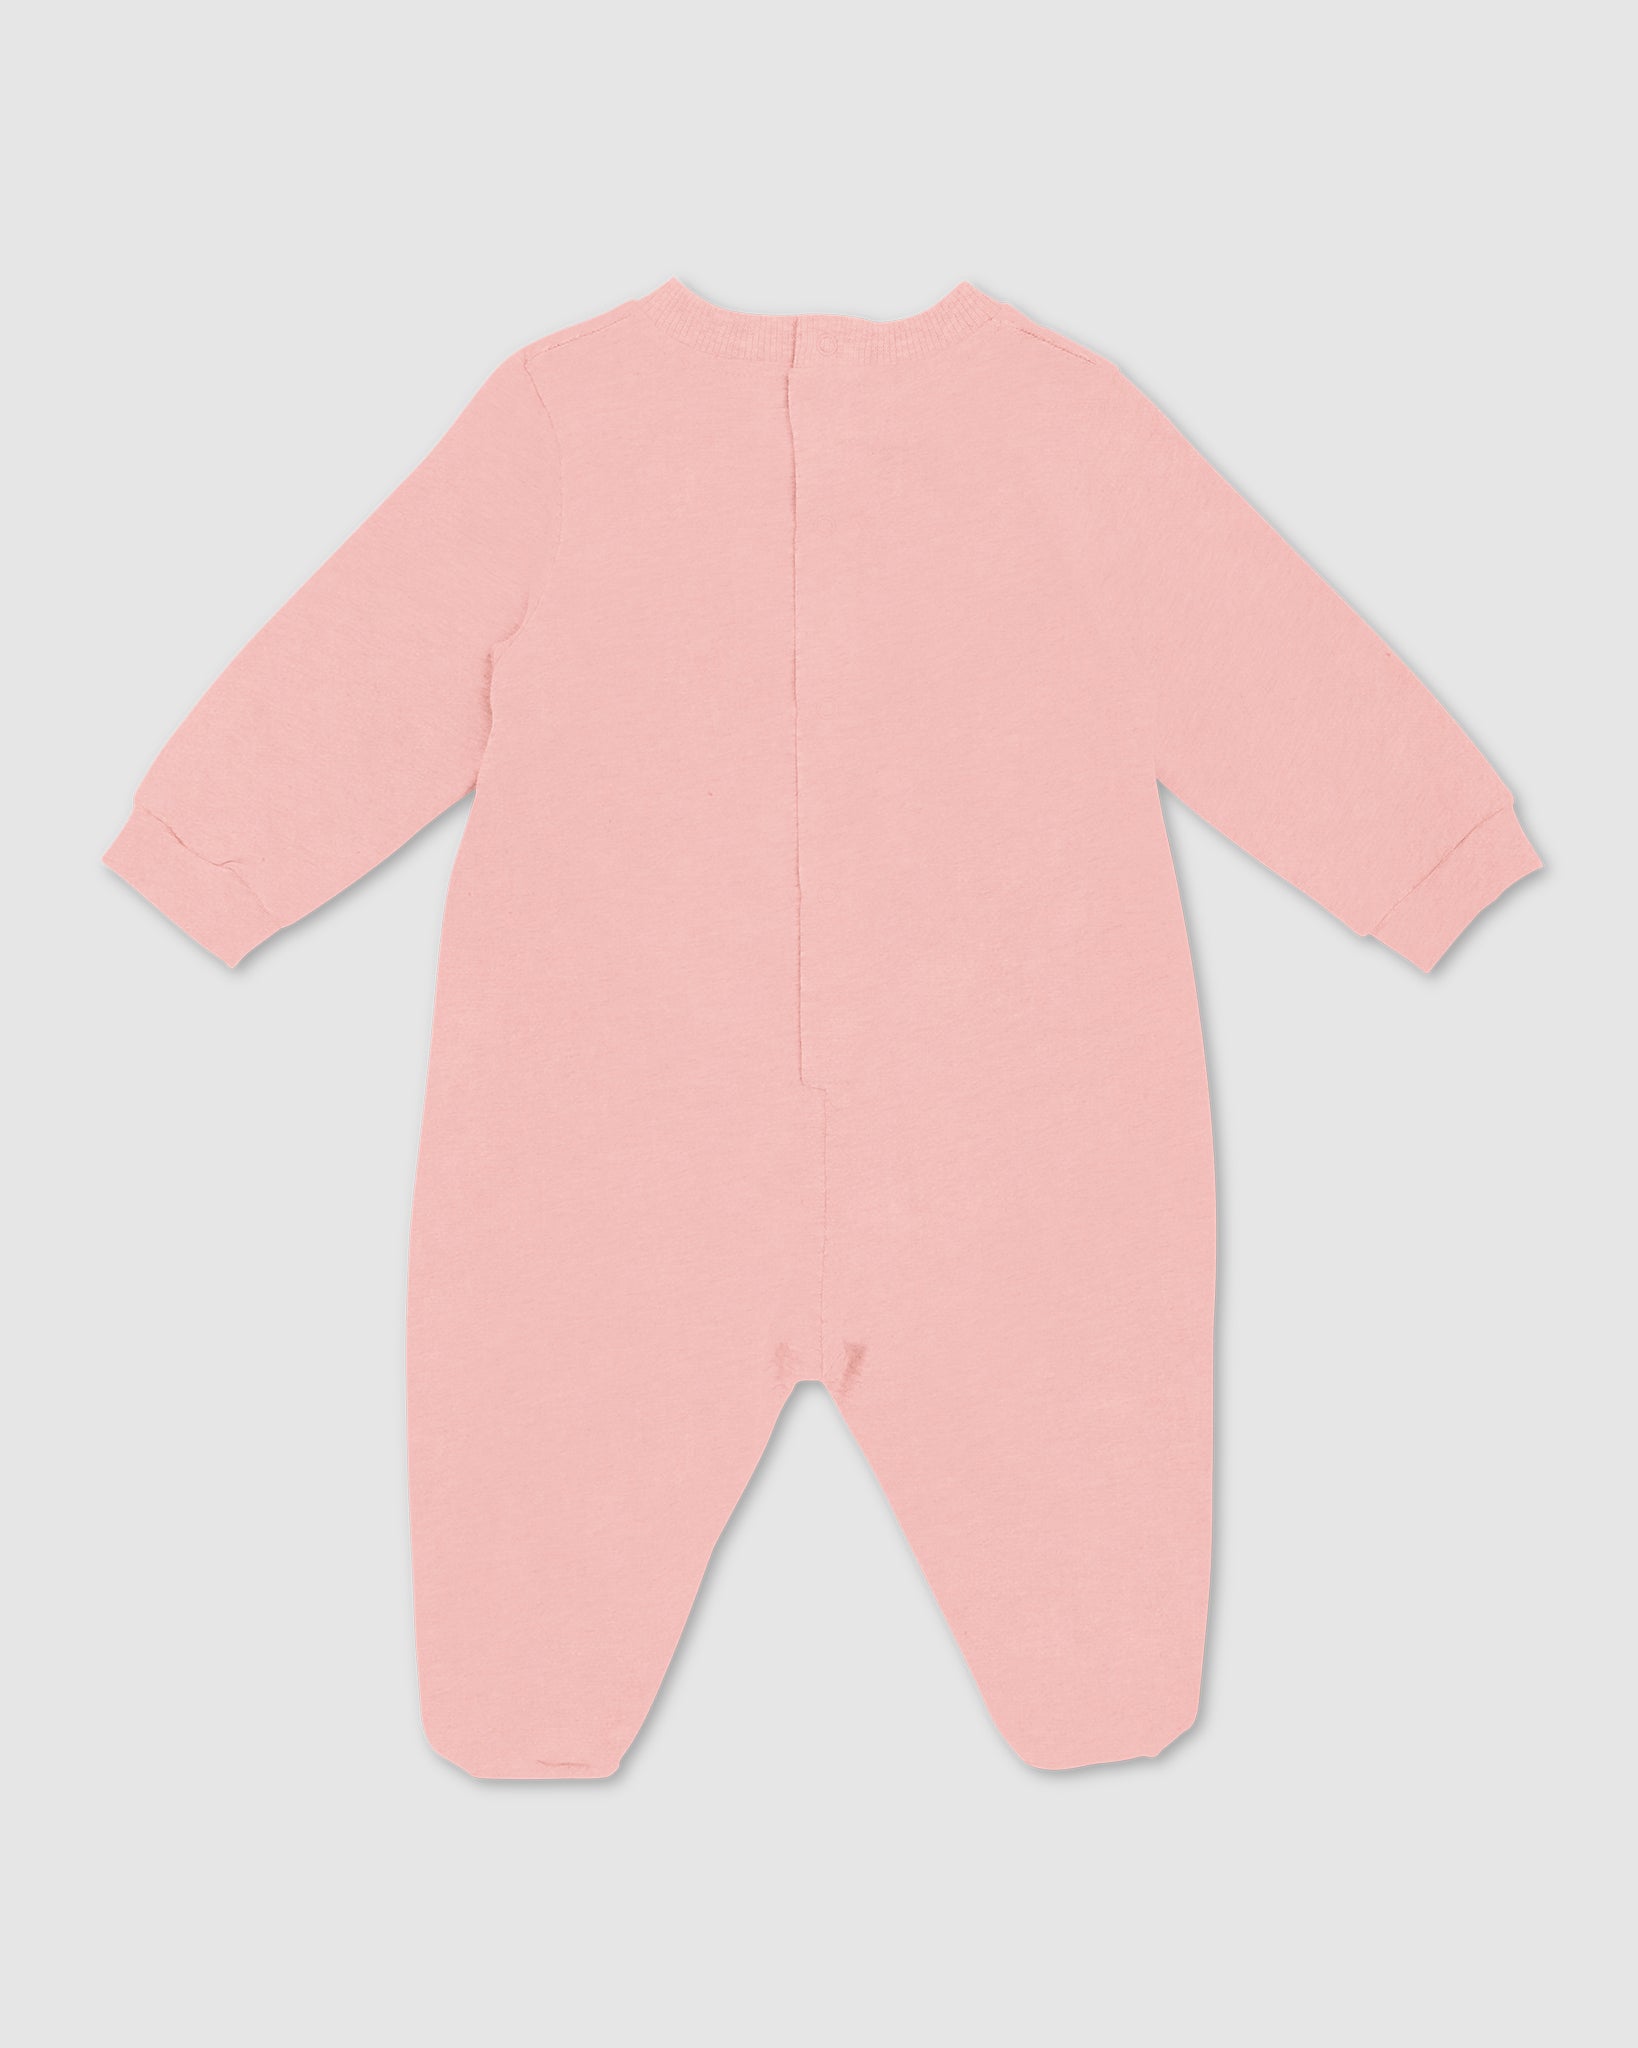 Girl Baby White/Pink | GCDS Cherry and Playsuit: Off Playsuits Set Gift